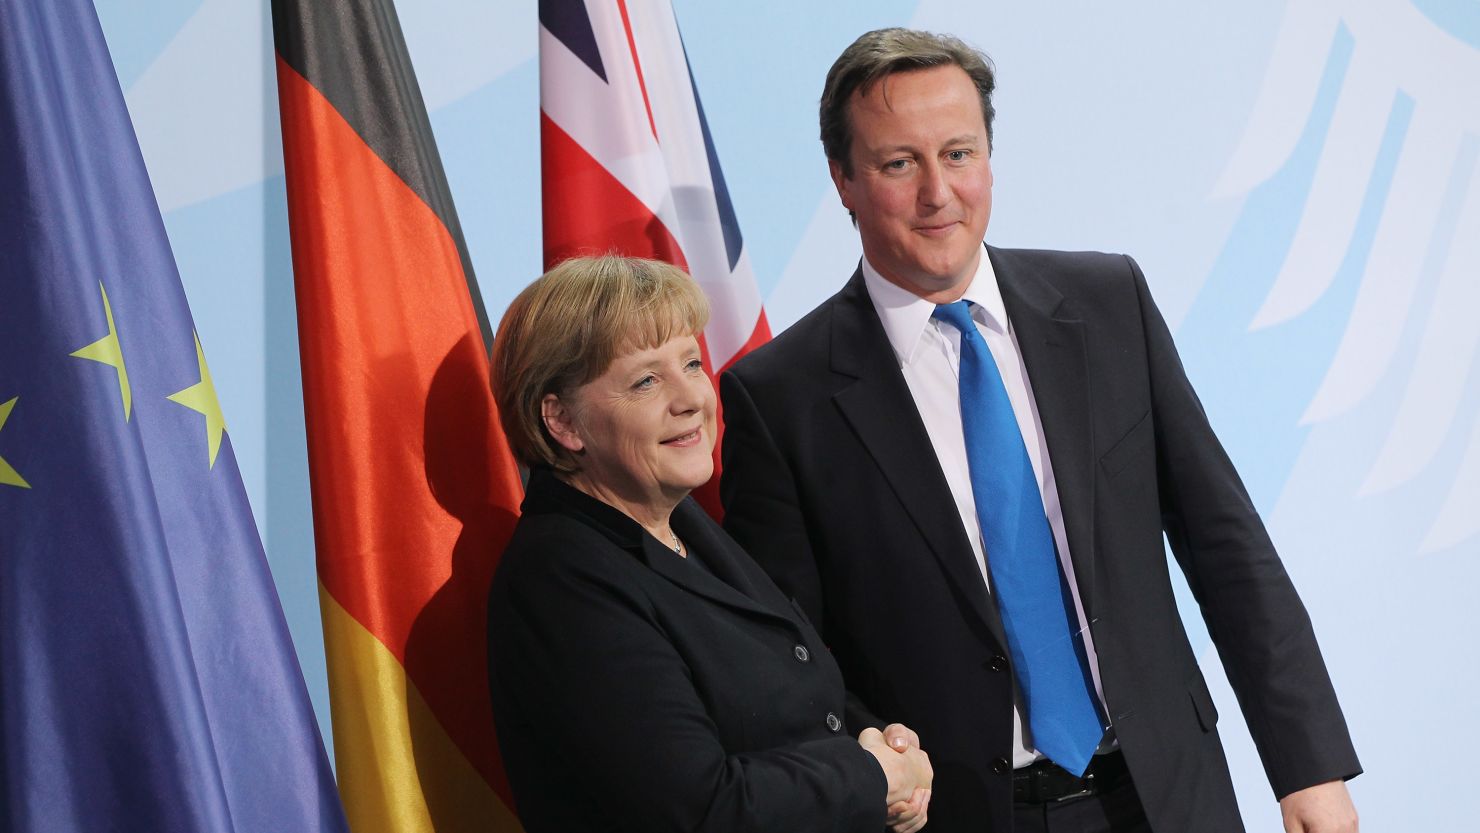 Angela Merkel and David Cameron shake hands after a press conference in Berlin on November 18, 2011.